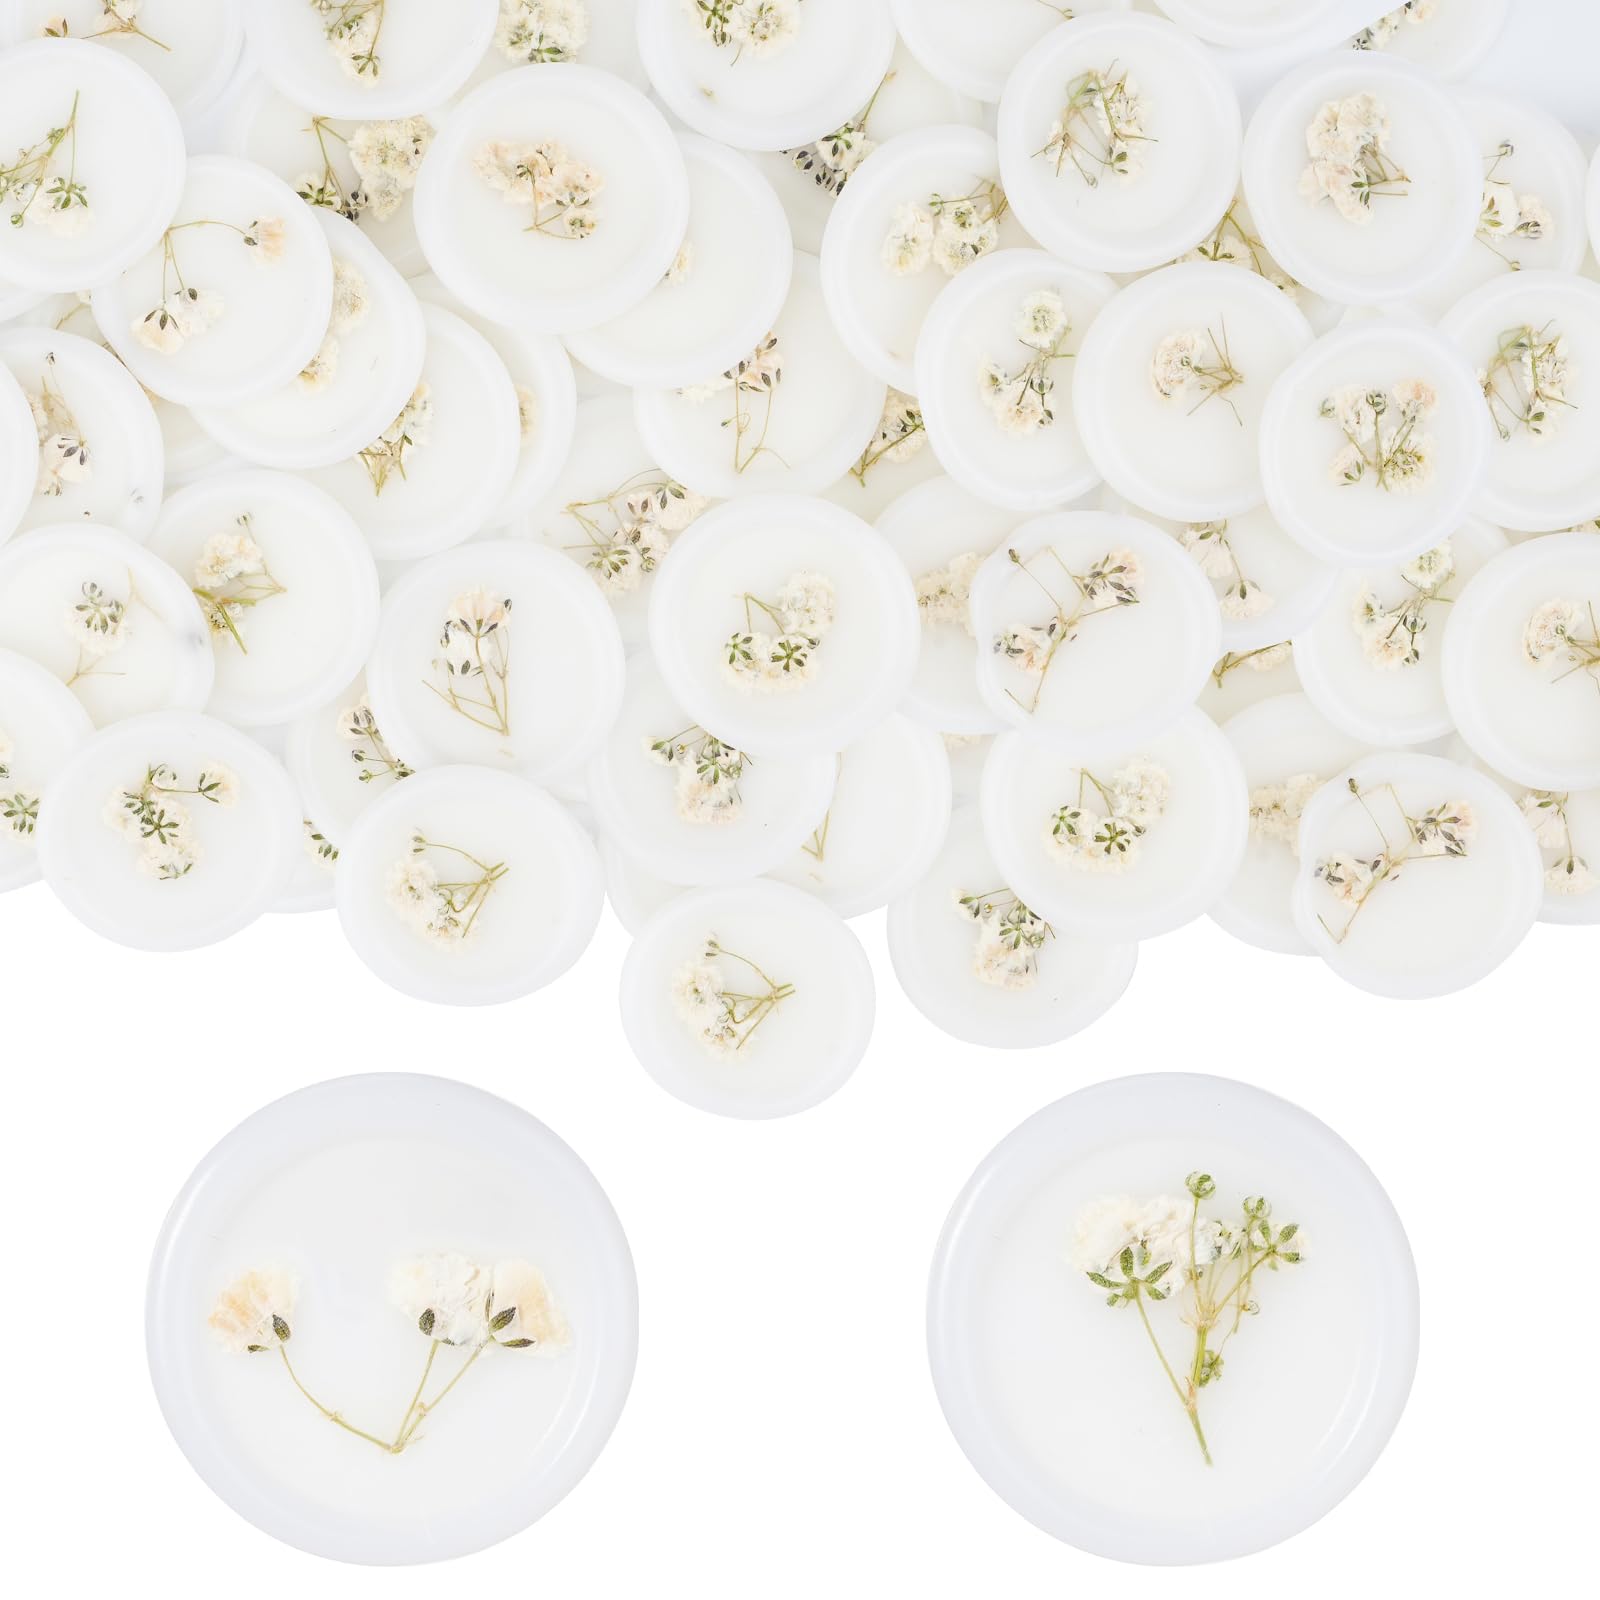 Qilery 100 Pcs Adhesive Wax Seal Stickers White Dry Floral Wax Seal Sticks Backing Envelope Seals Wedding Wax Seal for Wedding Invitations Bridal Shower Party Letter Envelope (Baby's Breath)